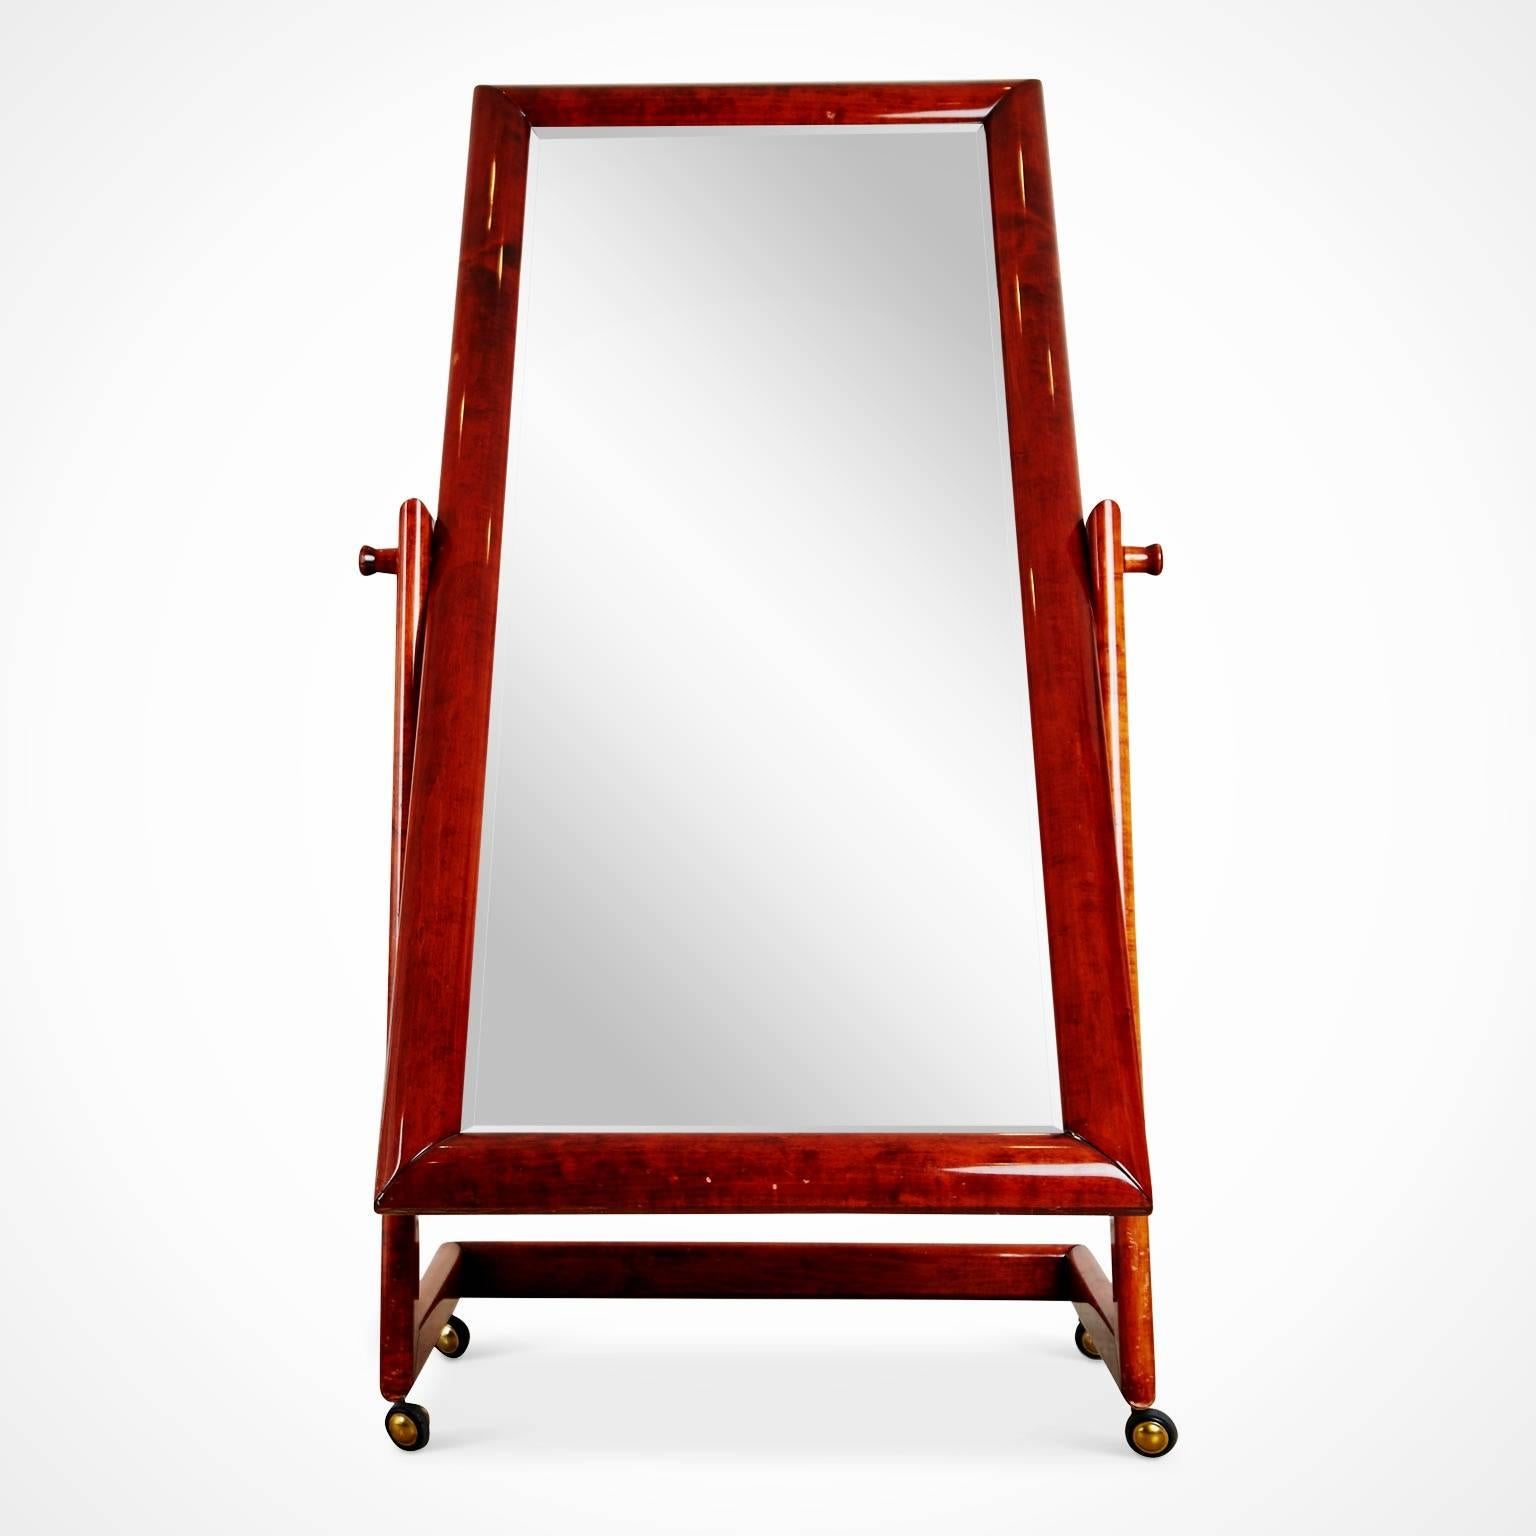 Elegantly executed modern Italian cheval standing mirror. This full length floor mirror rotates smoothly and is able to accommodate many alternate angles while dressing, which can be adjusted using by using the substantial knobs on either side. The